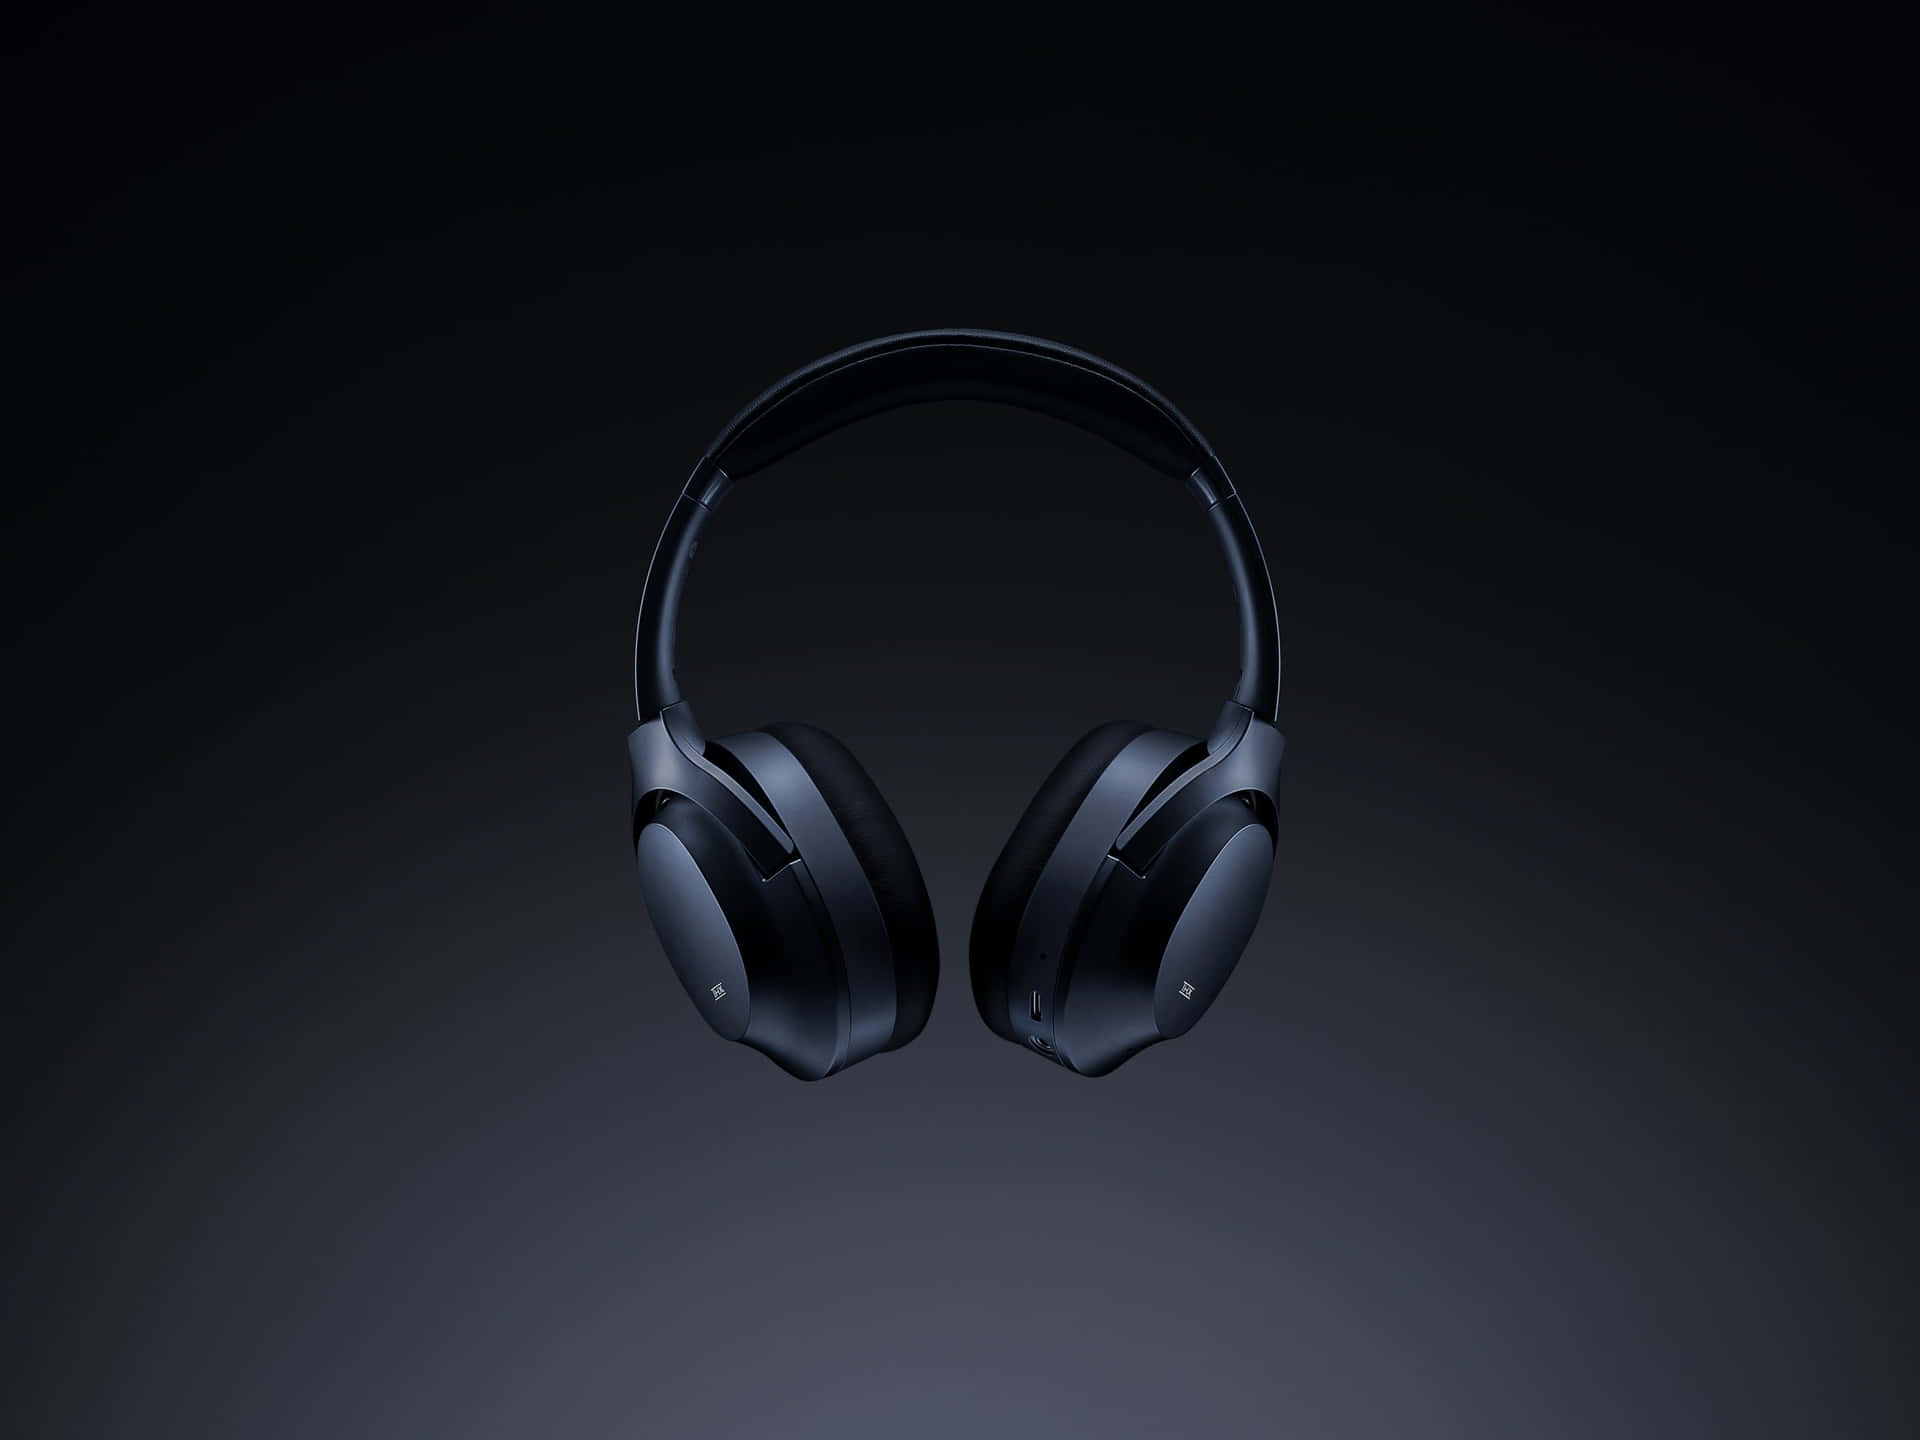 Music Fans Unite! With these headphones, the soundtrack to your life will be nothing short of epic.